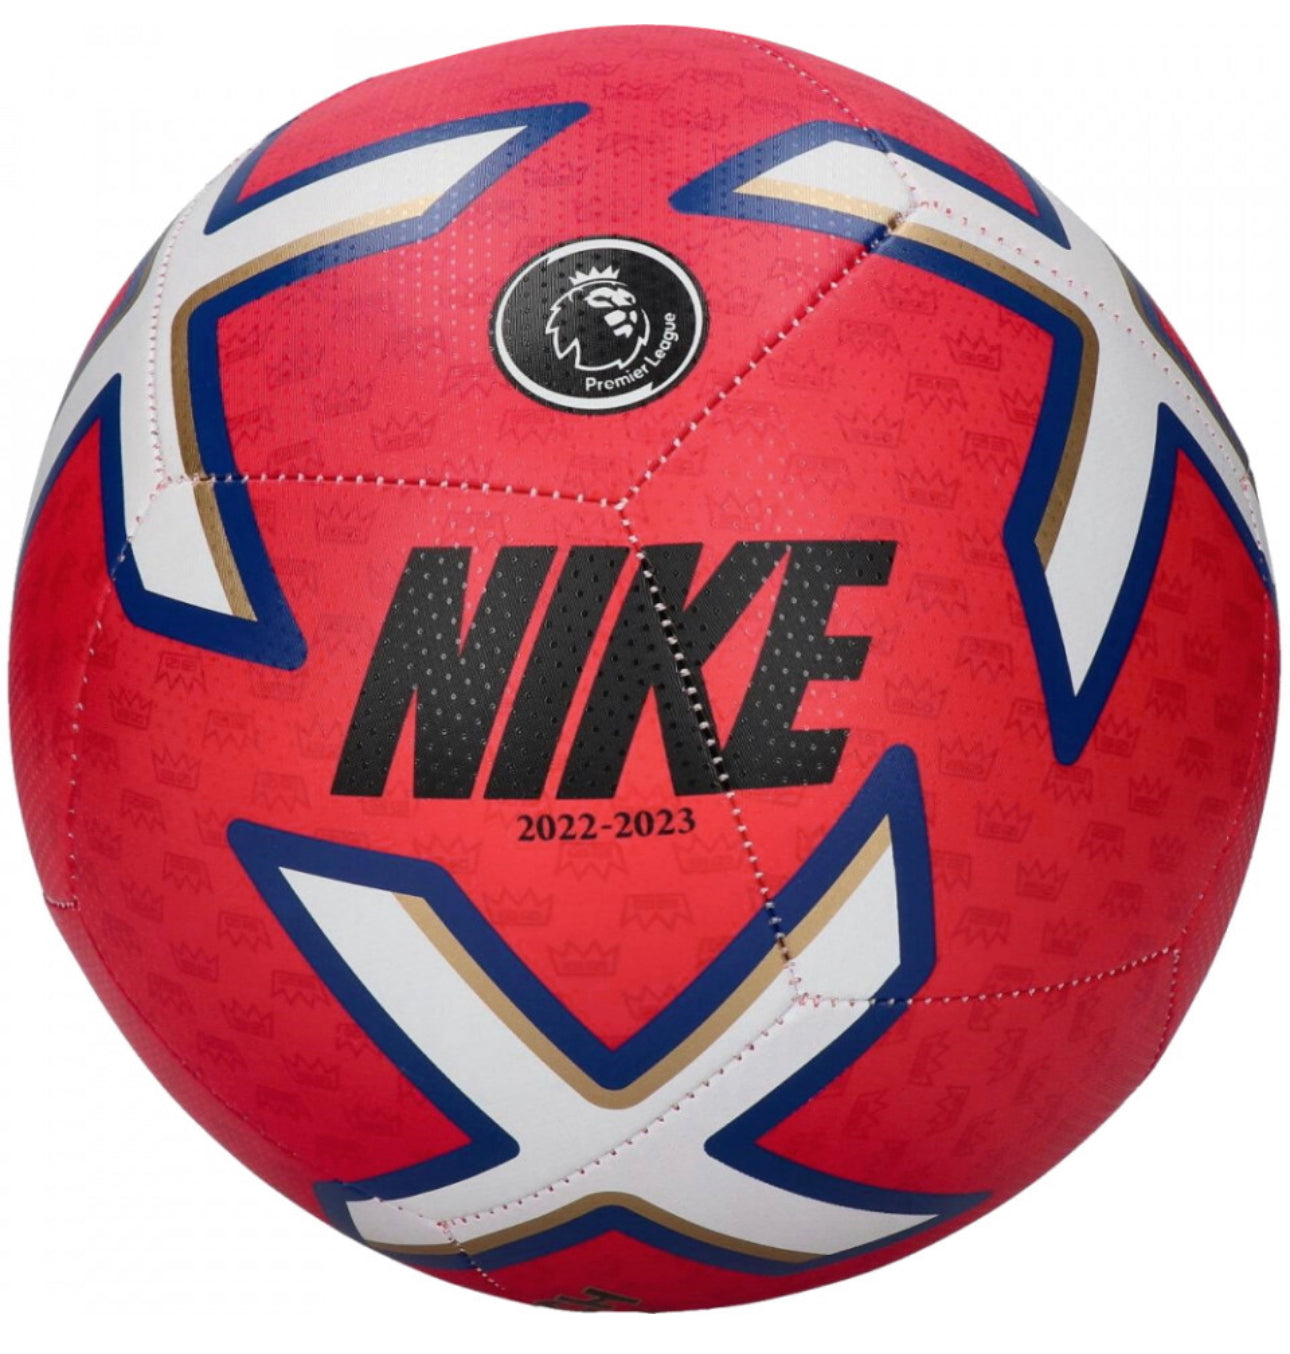 Nike Pitch Premier League Football 2022/23 Red